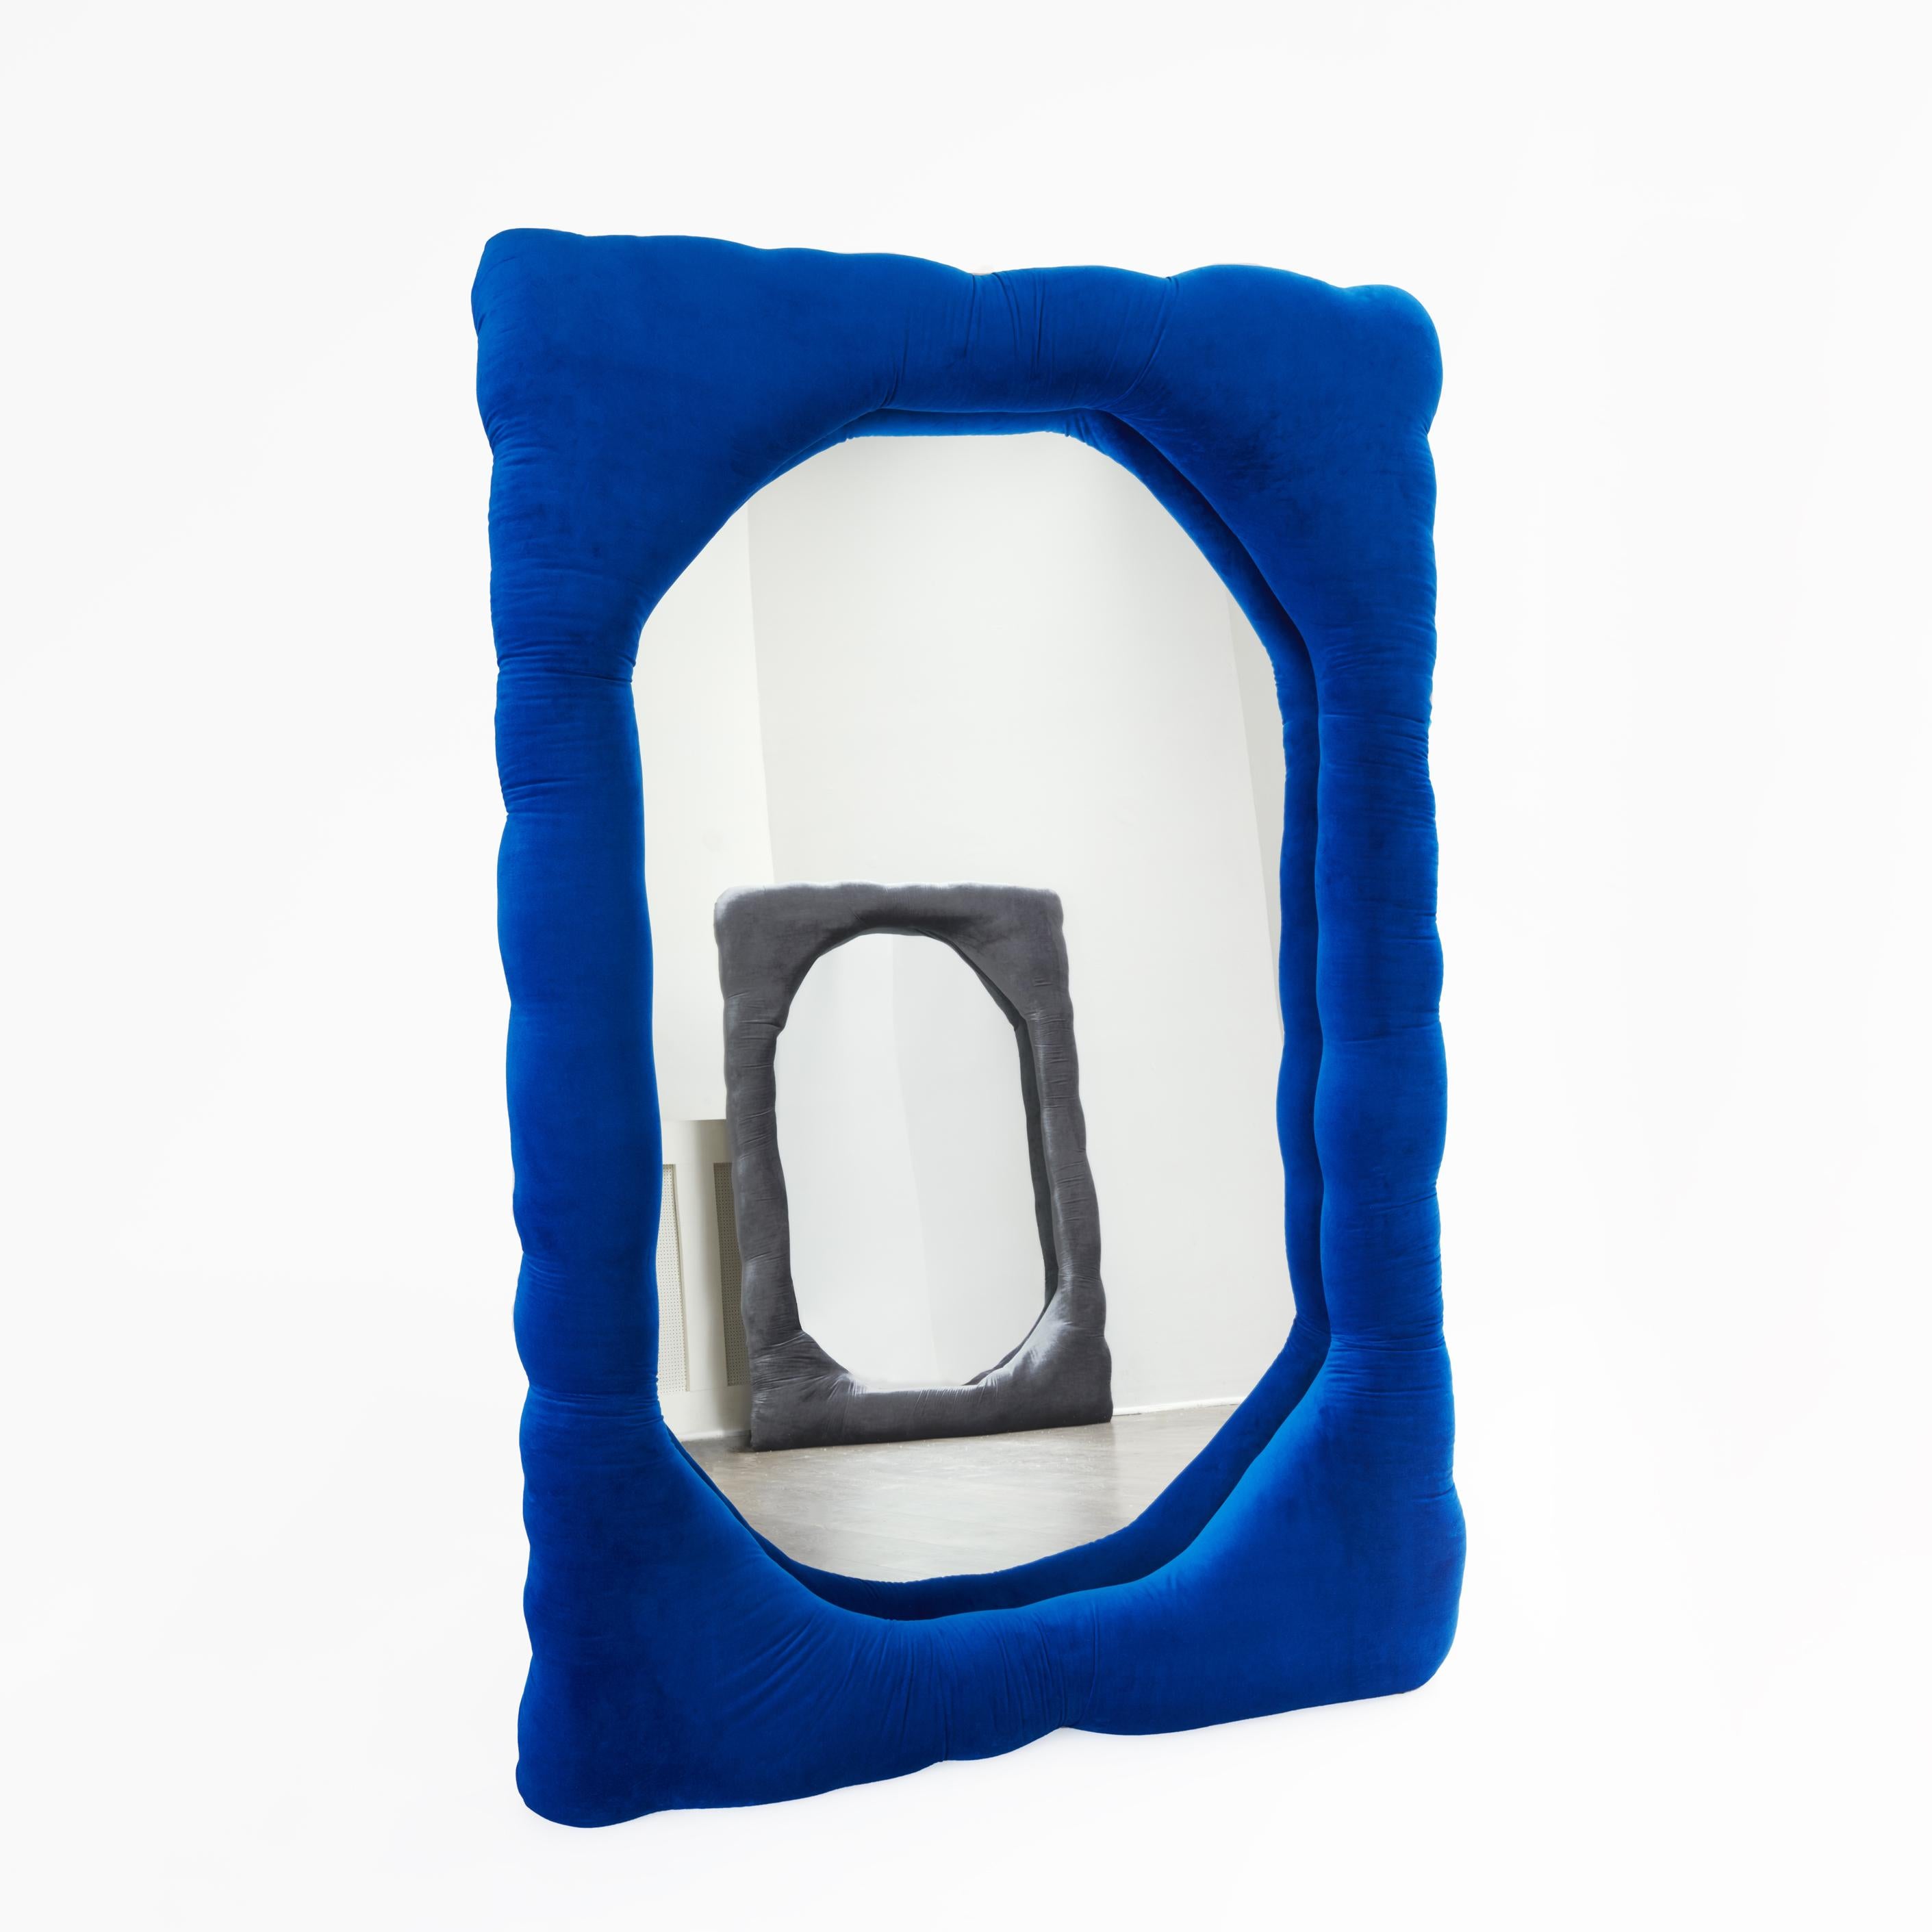 Velvet Biomorphic Mirror in Cobalt Blue by Brandi Howe, REP by Tuleste Factory In New Condition For Sale In New York, NY